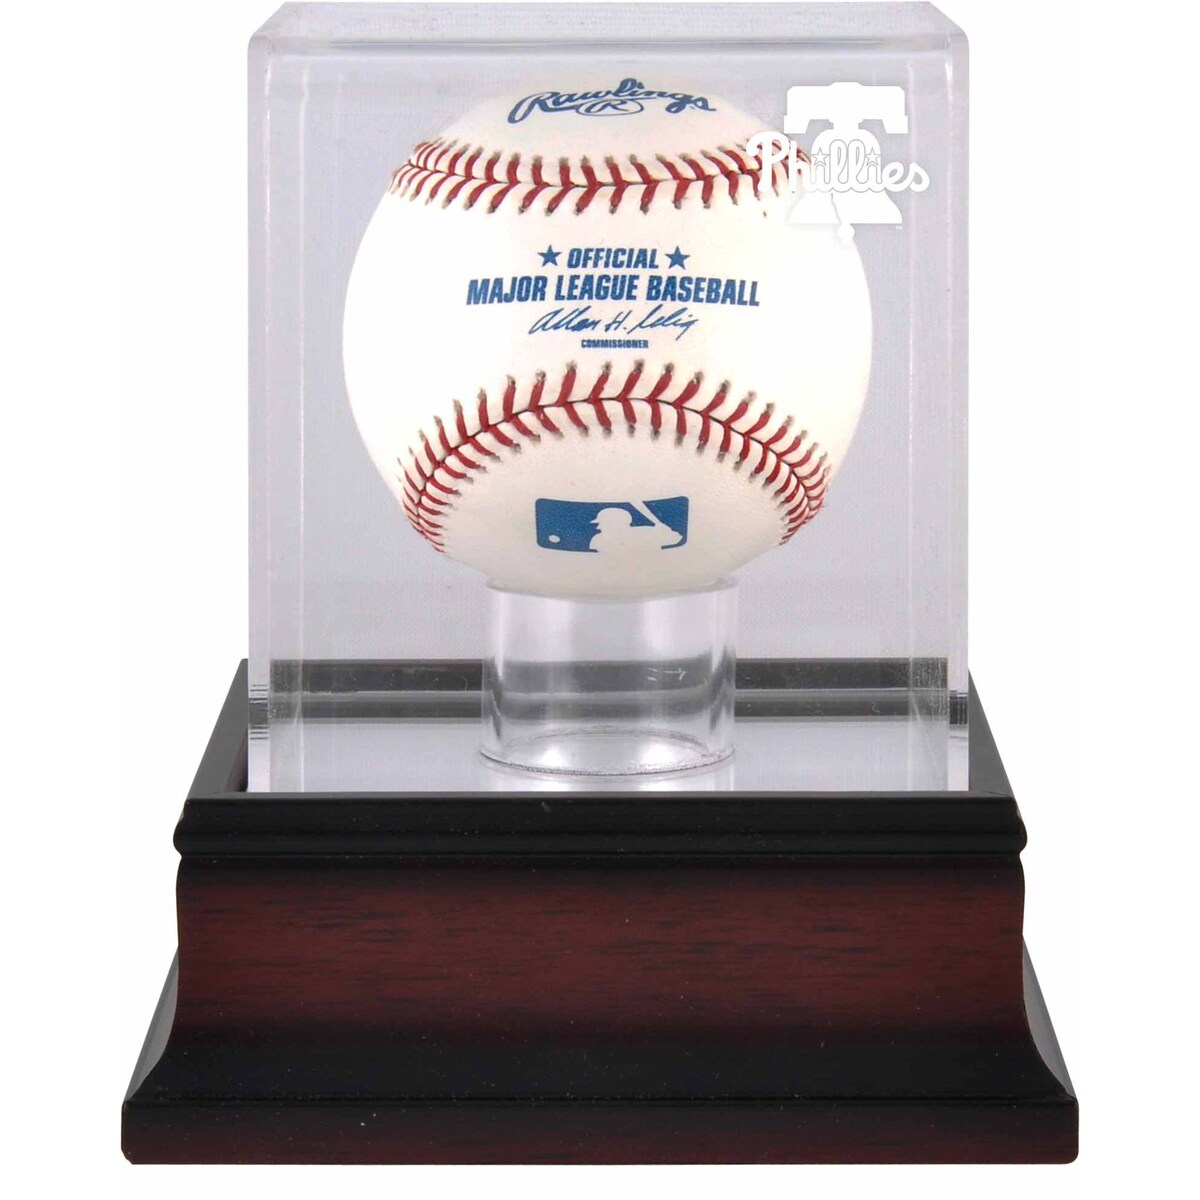 This Philadelphia Phillies logo display case features a 1/8"-thick clear acrylic removable lid with an antique mahogany finished base. It features a team logo and is perfect to display your collectible baseball. It is officially licensed by Major League Baseball. Measures 5 1/4" x 5 1/4" x 6". Memorabilia sold separately.Memorabilia sold separatelyBrand: Fanatics AuthenticOfficially licensed